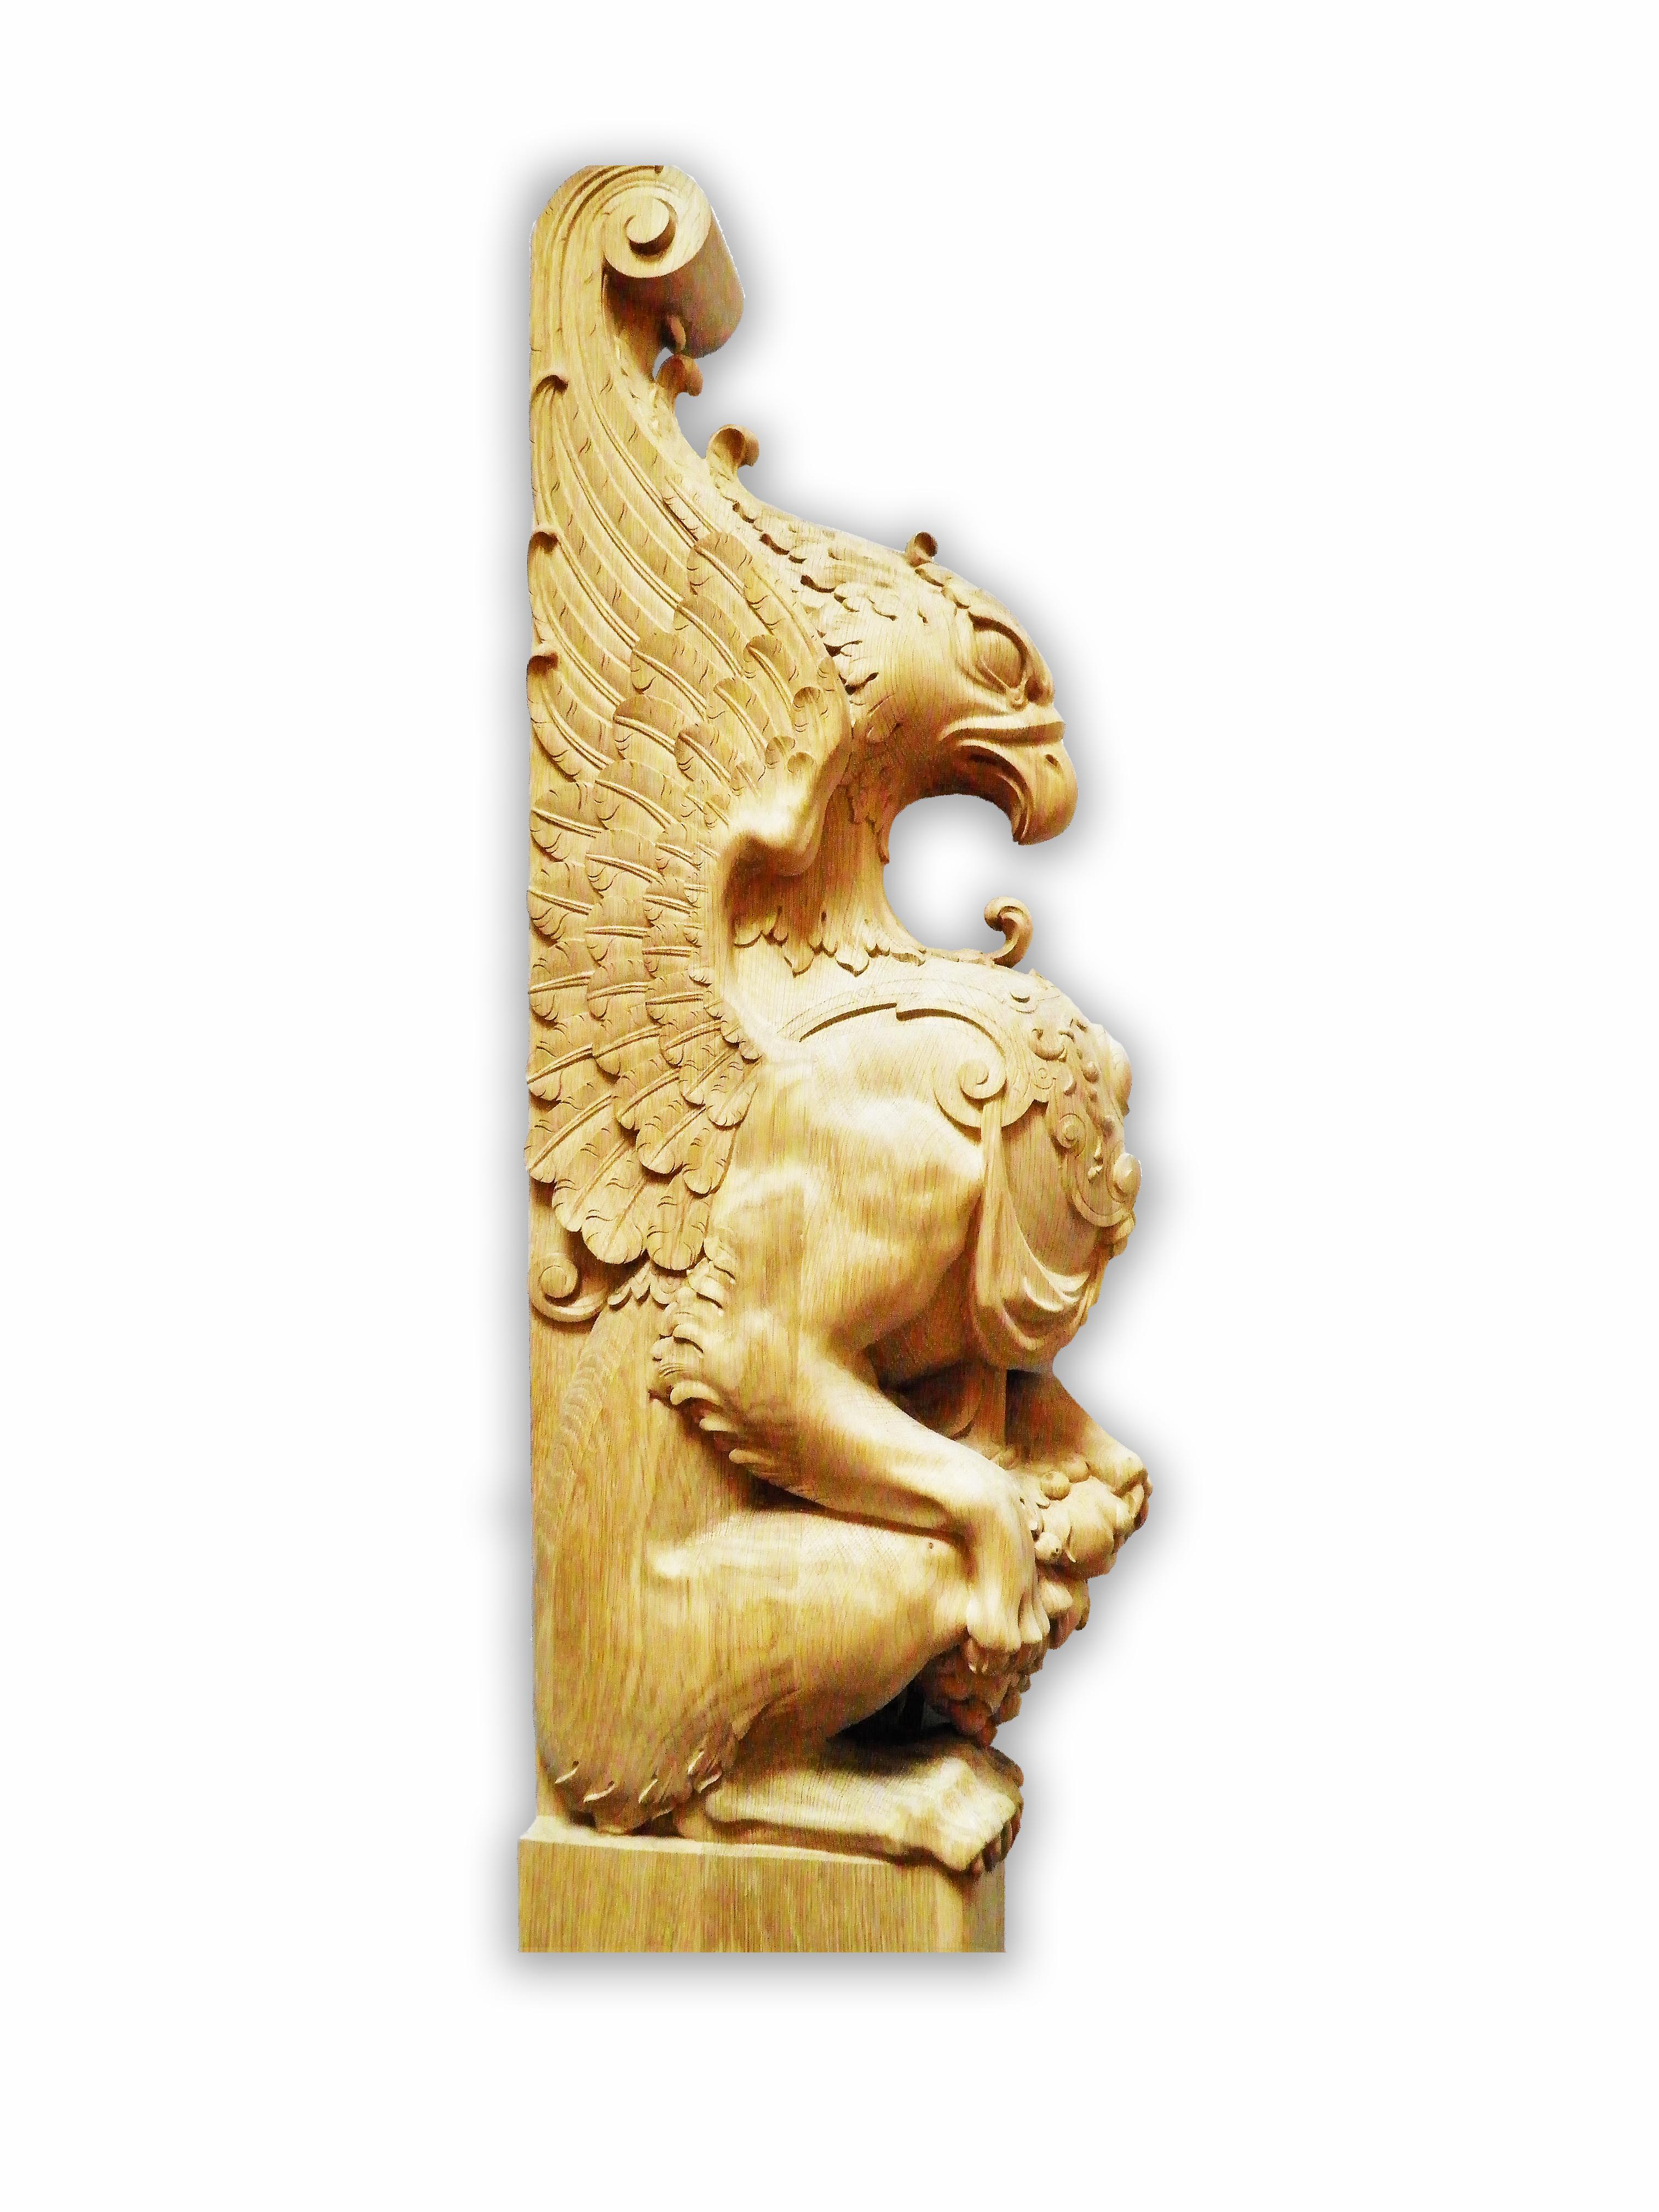 Unfinished high quality carved newel post Griffin, Griffon or Gryphon.

Please notice! Because of the large size and weight of cargo, we deliver this product to the nearest major international airport.

Each product is processed manually. The